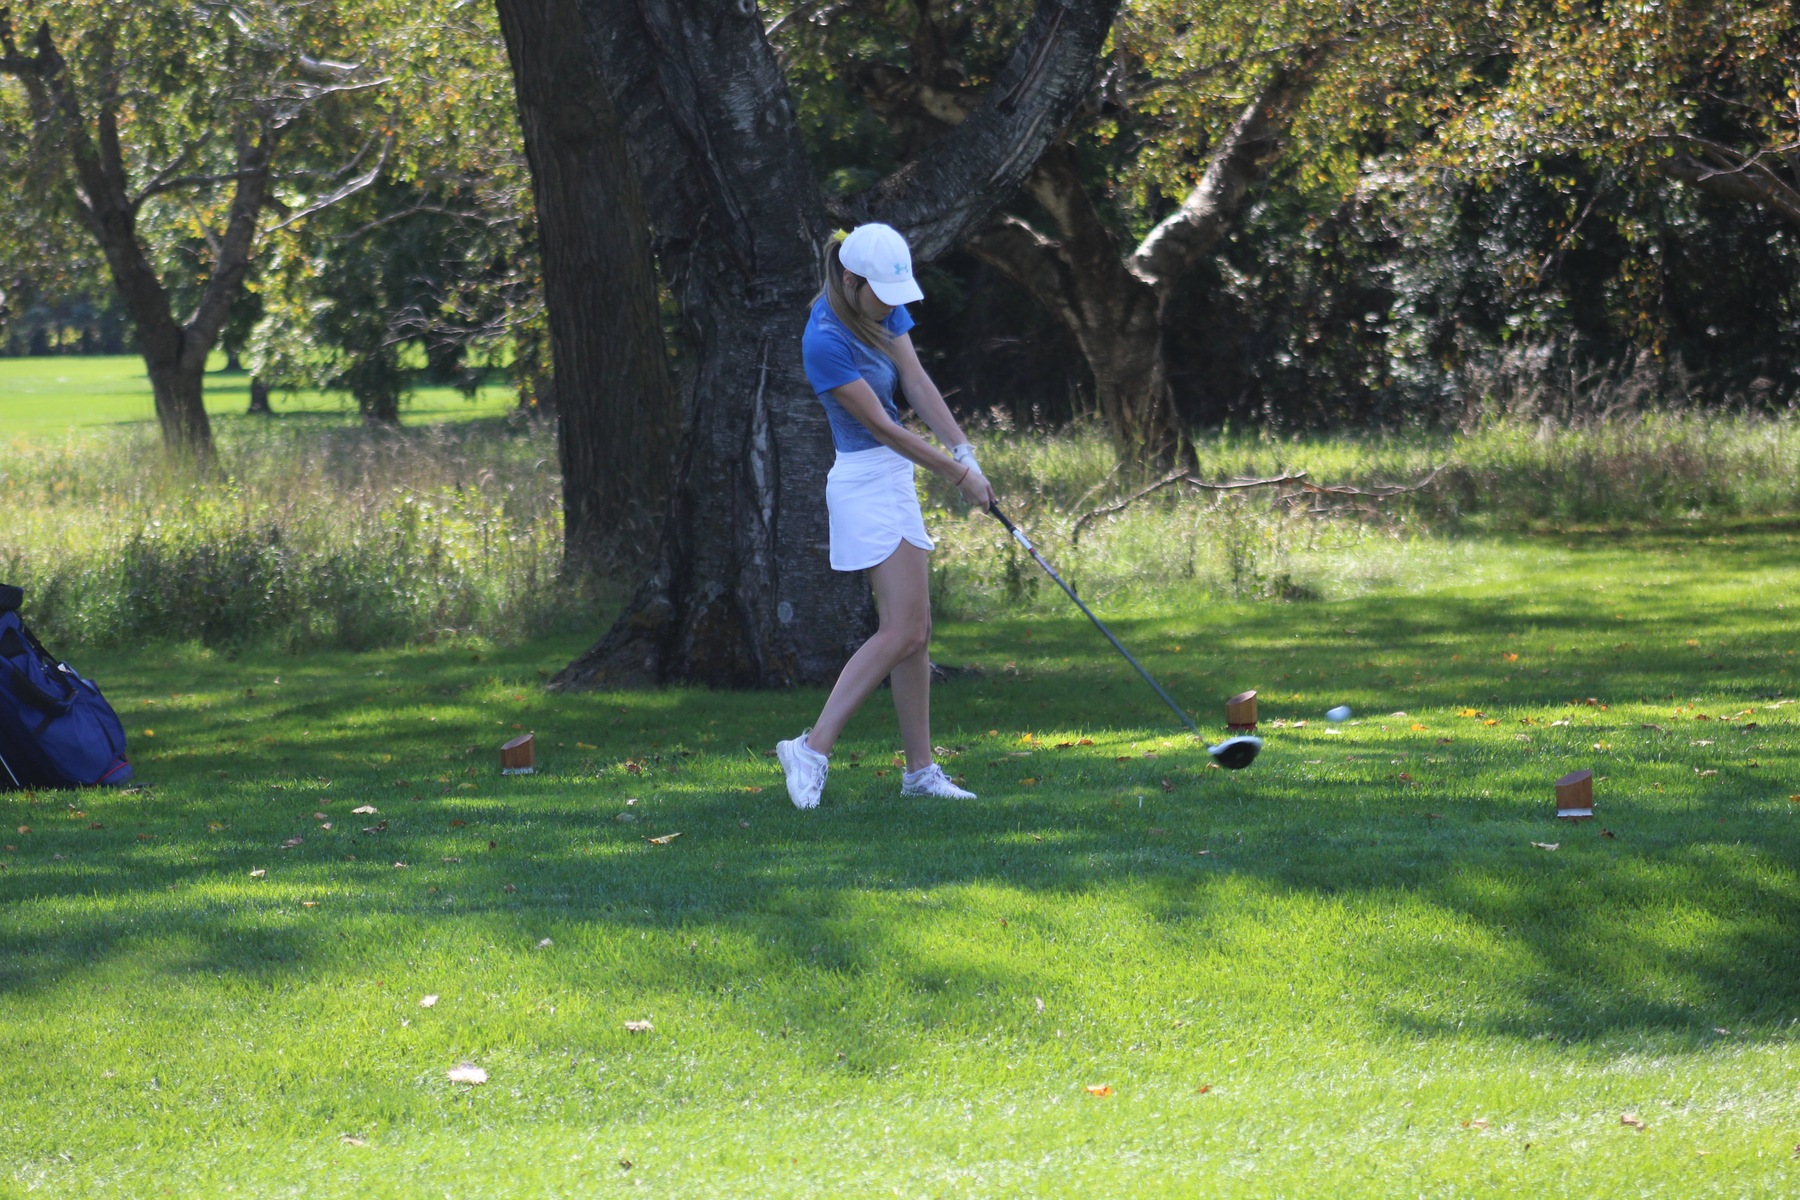 Sydney Fullerton tees off at the NIACC Invitational on Monday at the Mason City Country Club.